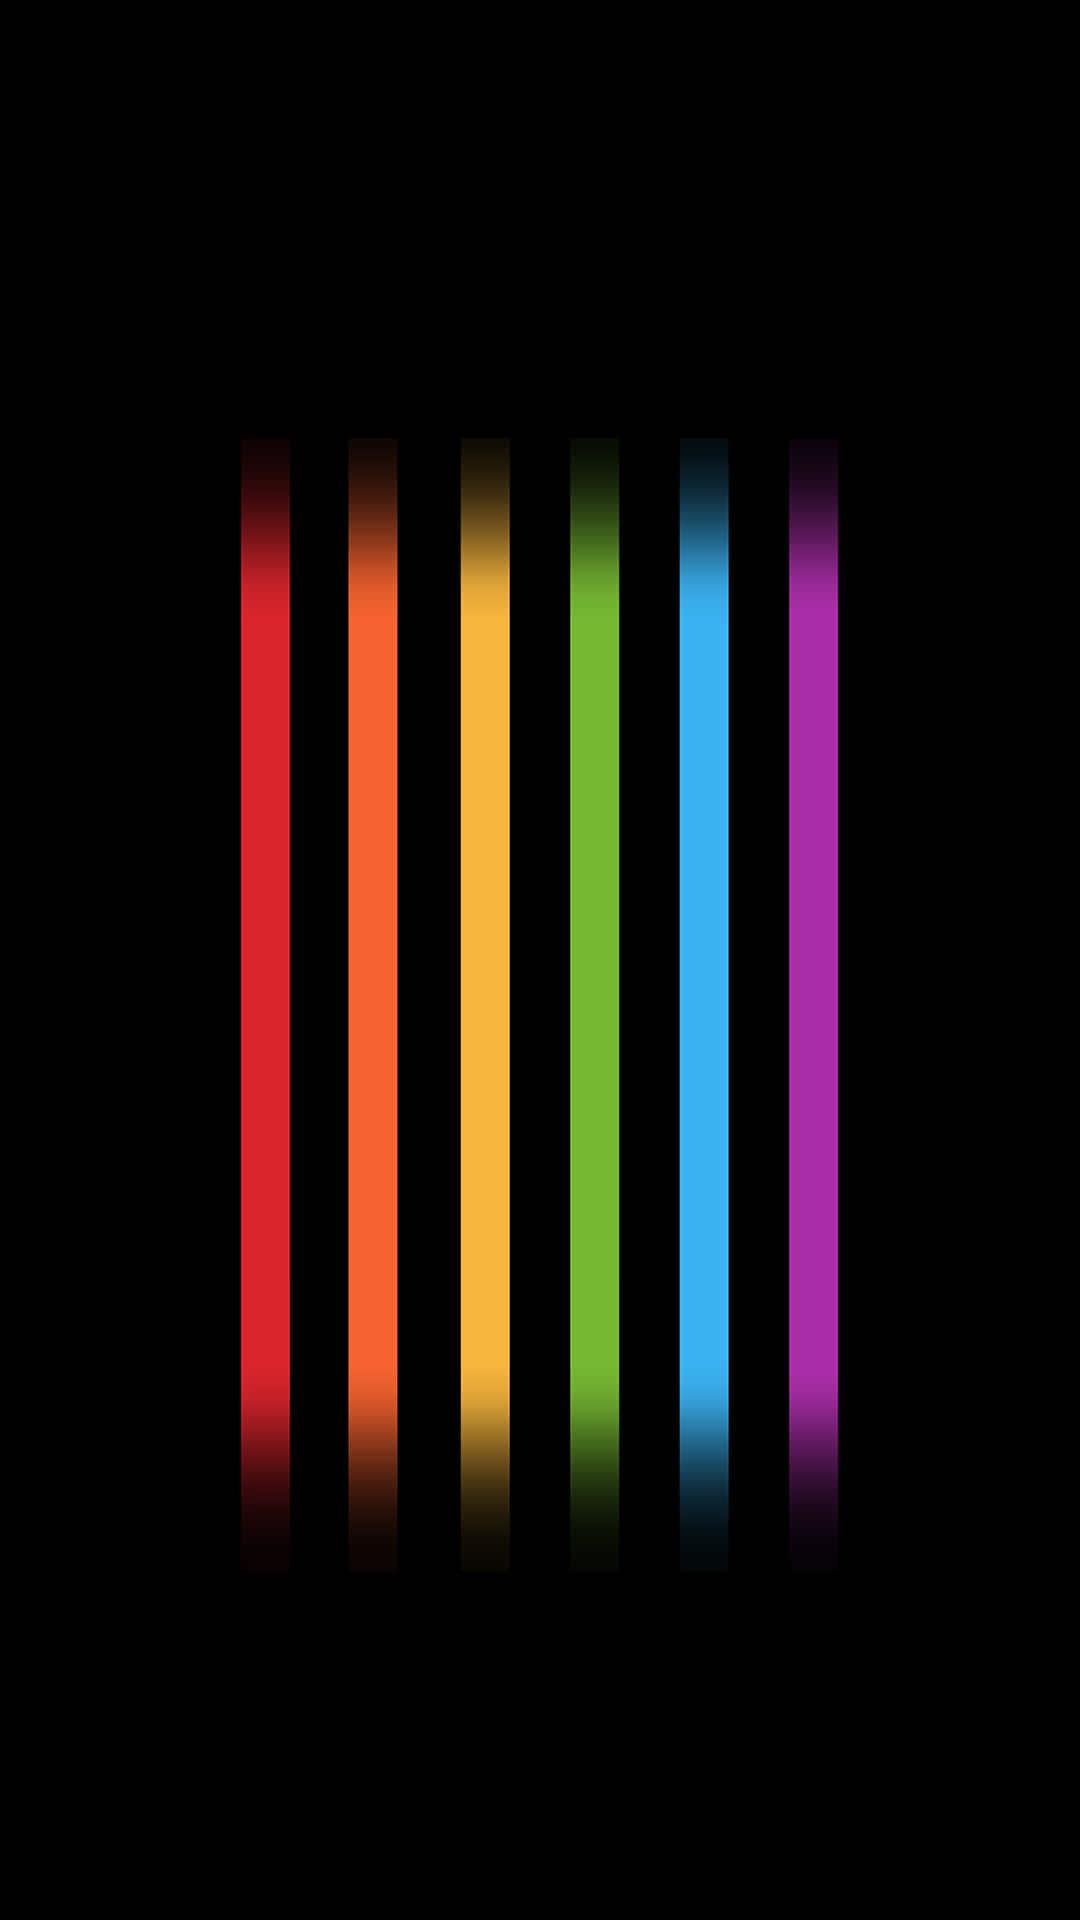 Apple Watch Face Pride wallpaper by AR07 iPhone X link in comments